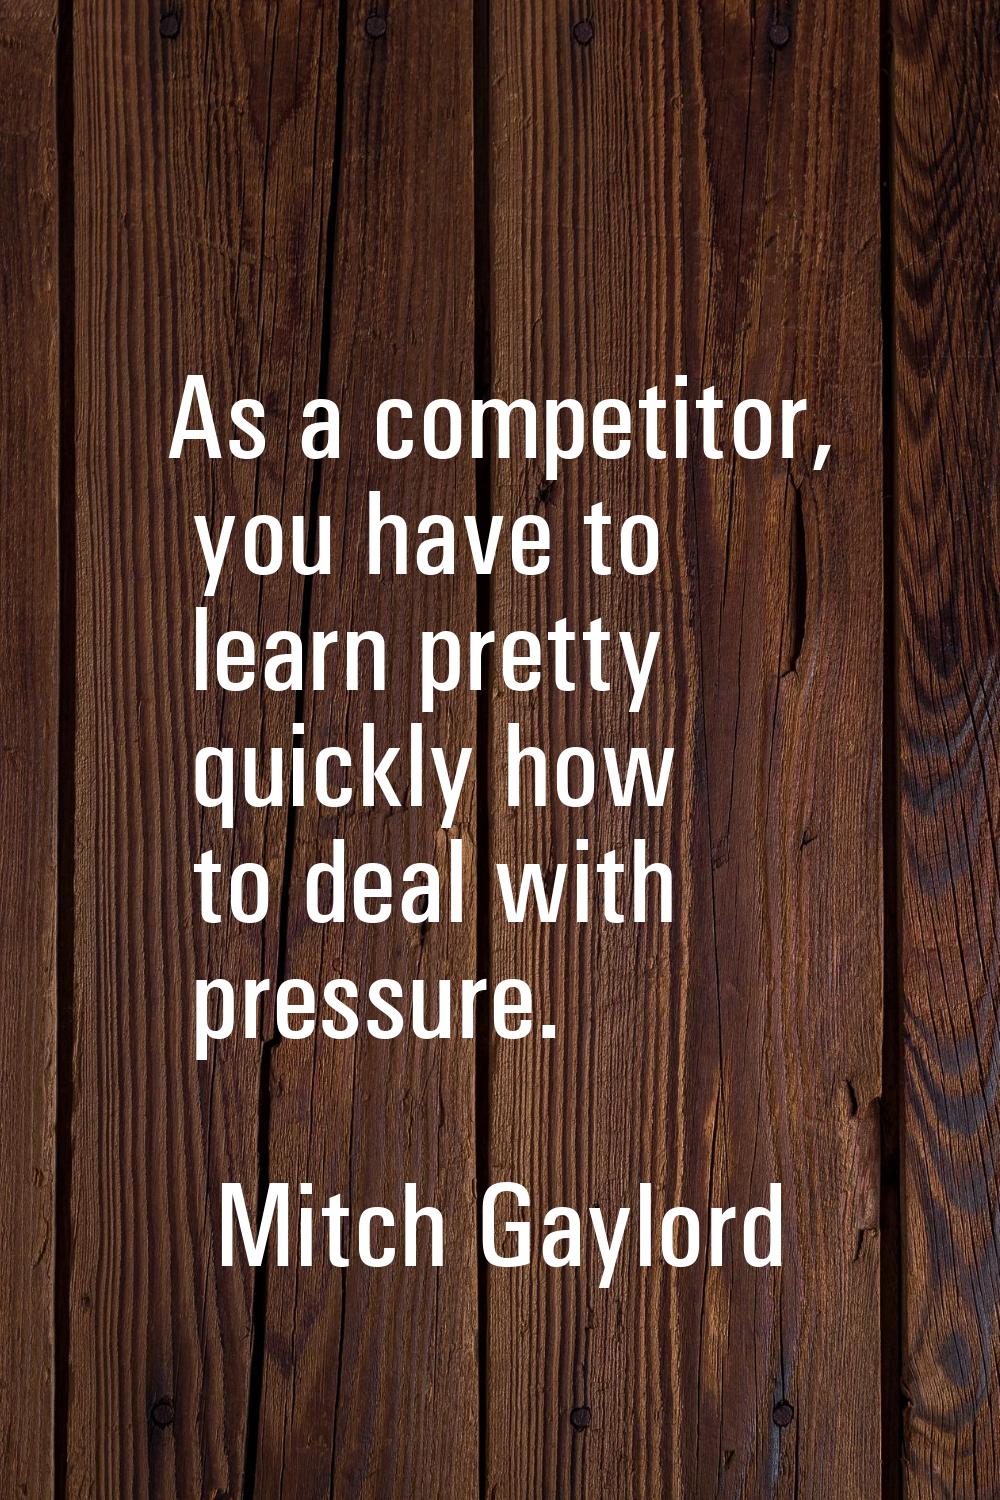 As a competitor, you have to learn pretty quickly how to deal with pressure.